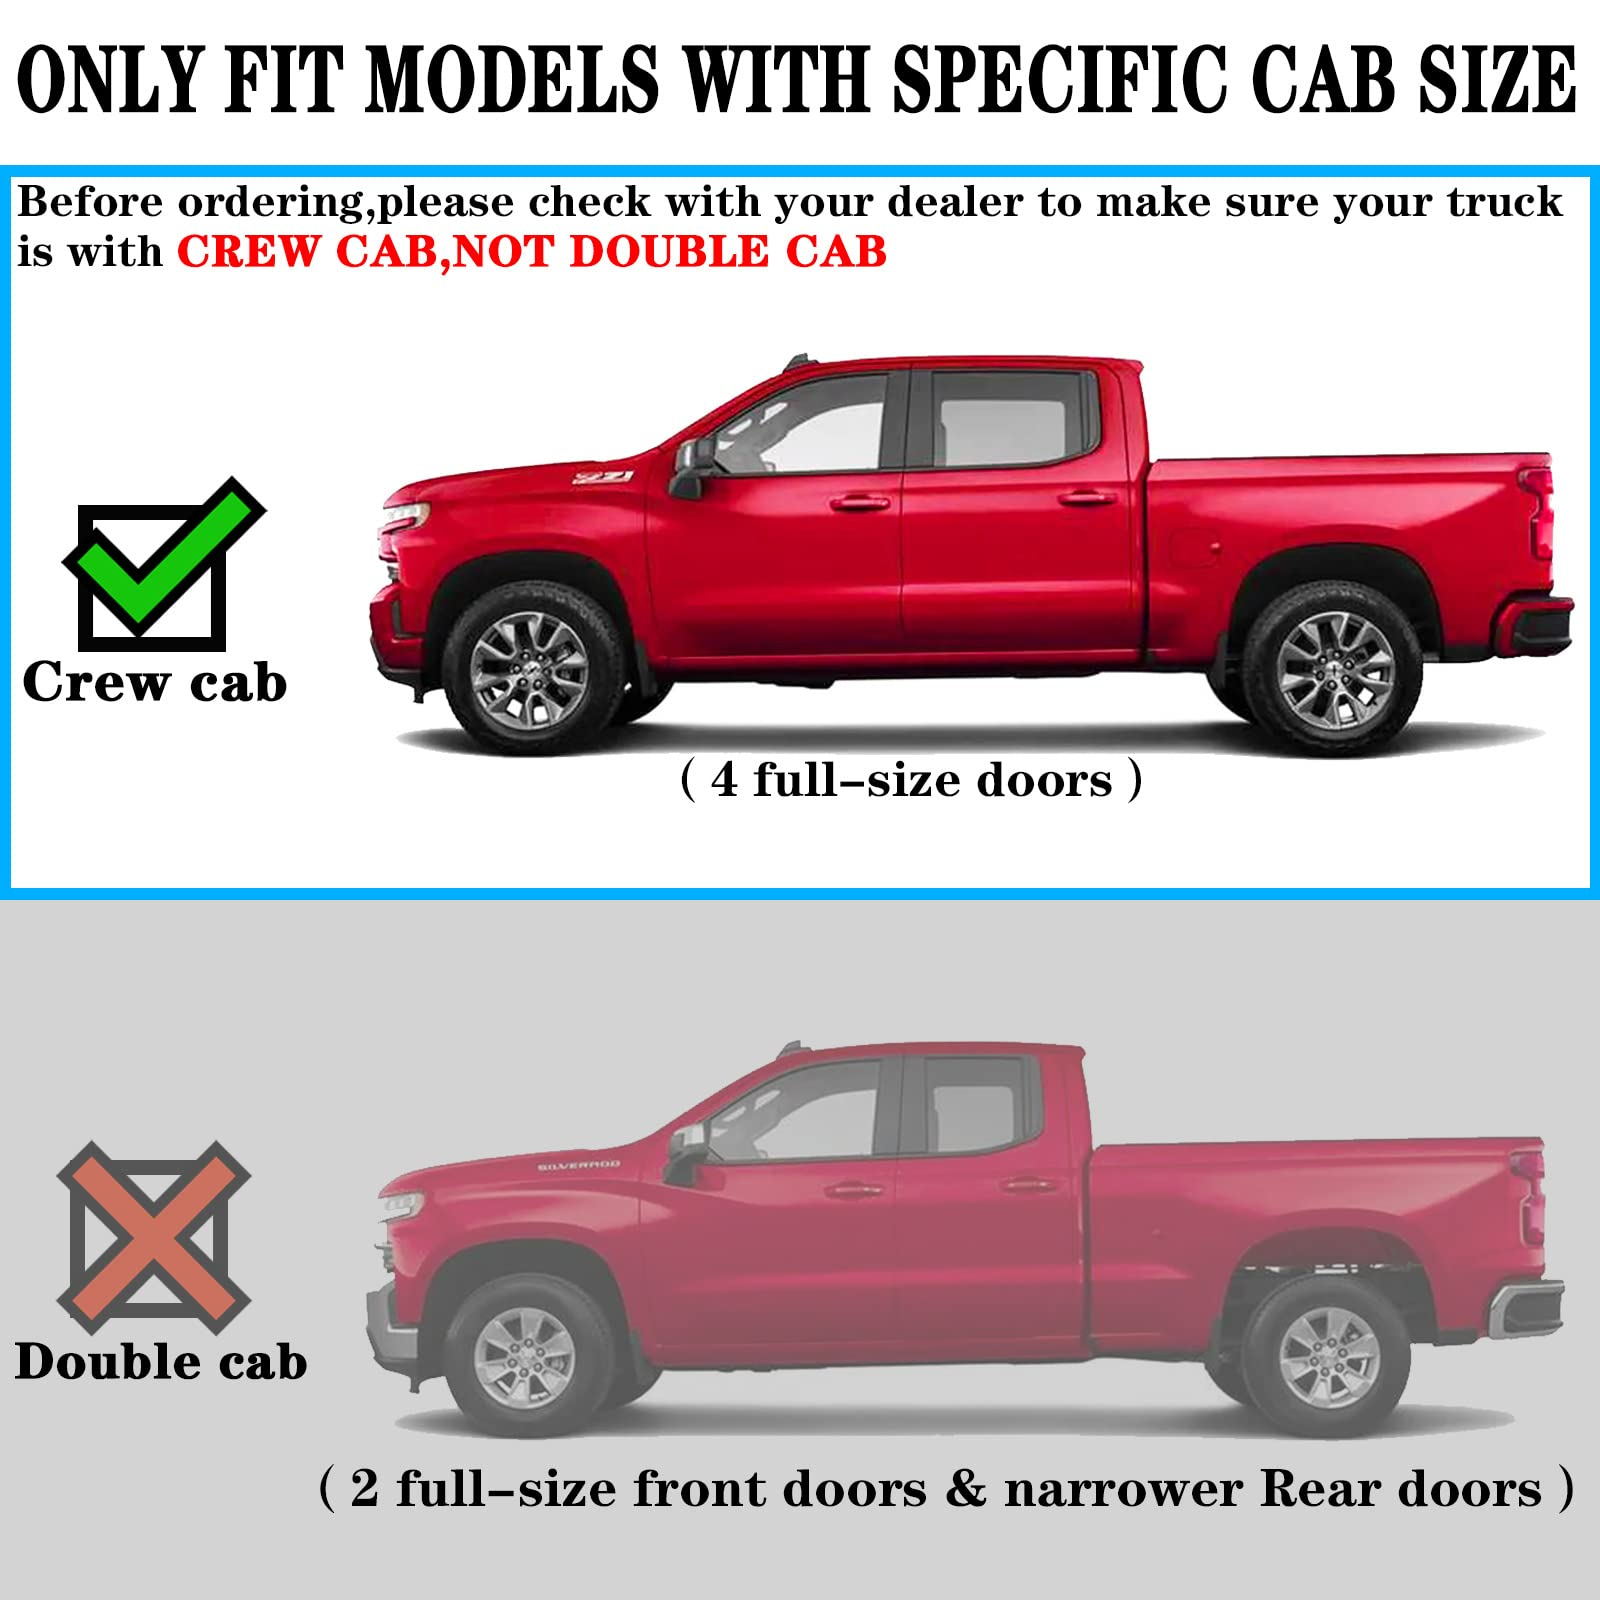 Running Boards Compatible with 2015-2024 Chevy Colorado/GMC Canyon Crew Cab D6 Style.- COMNOVA AUTOPART